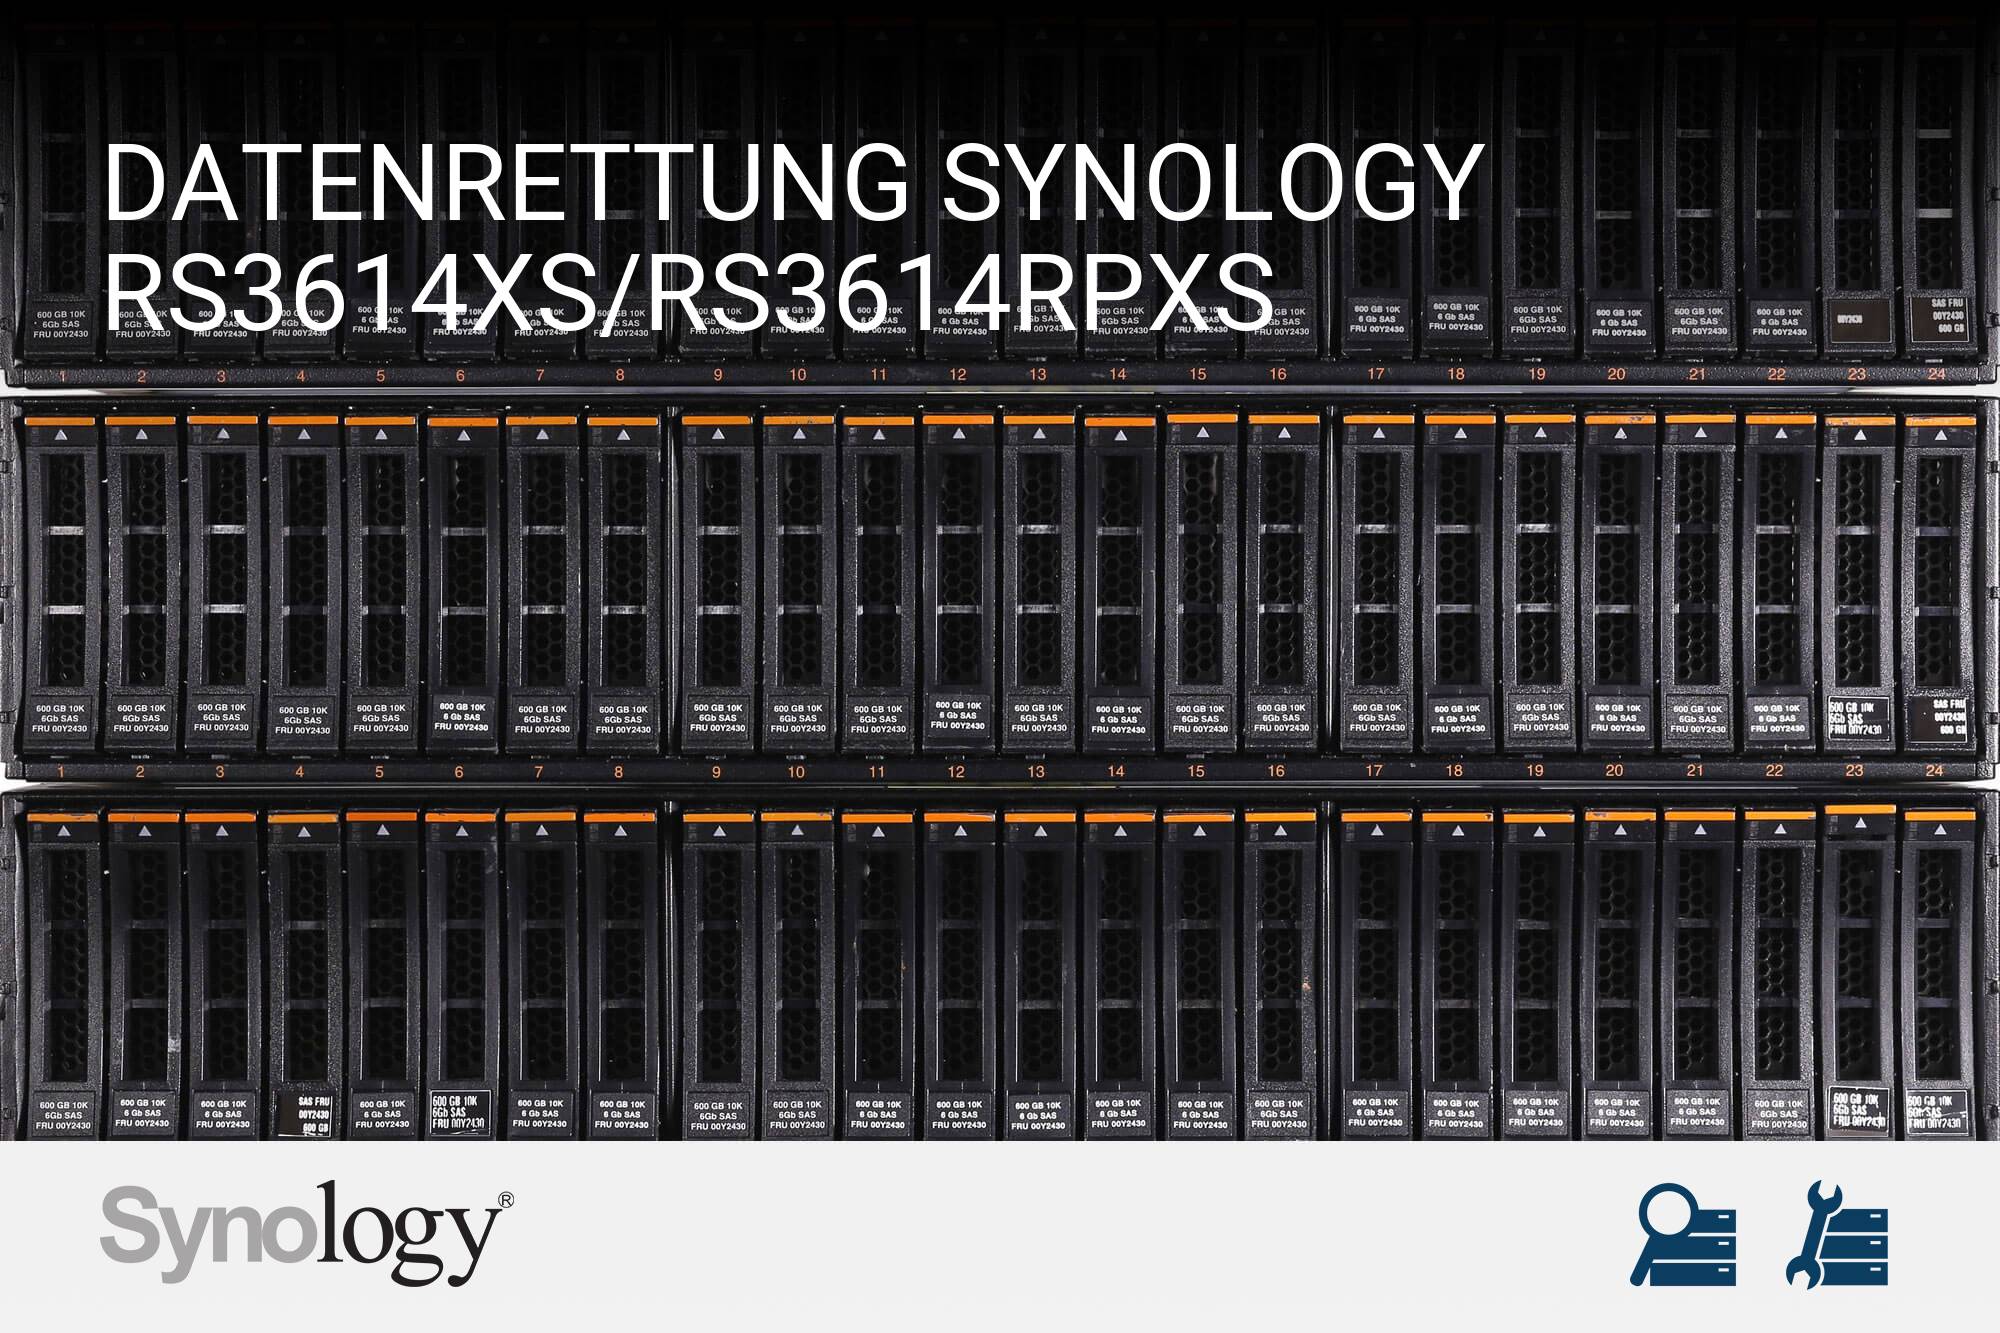 Synology RS3614xs/​RS3614RPxs